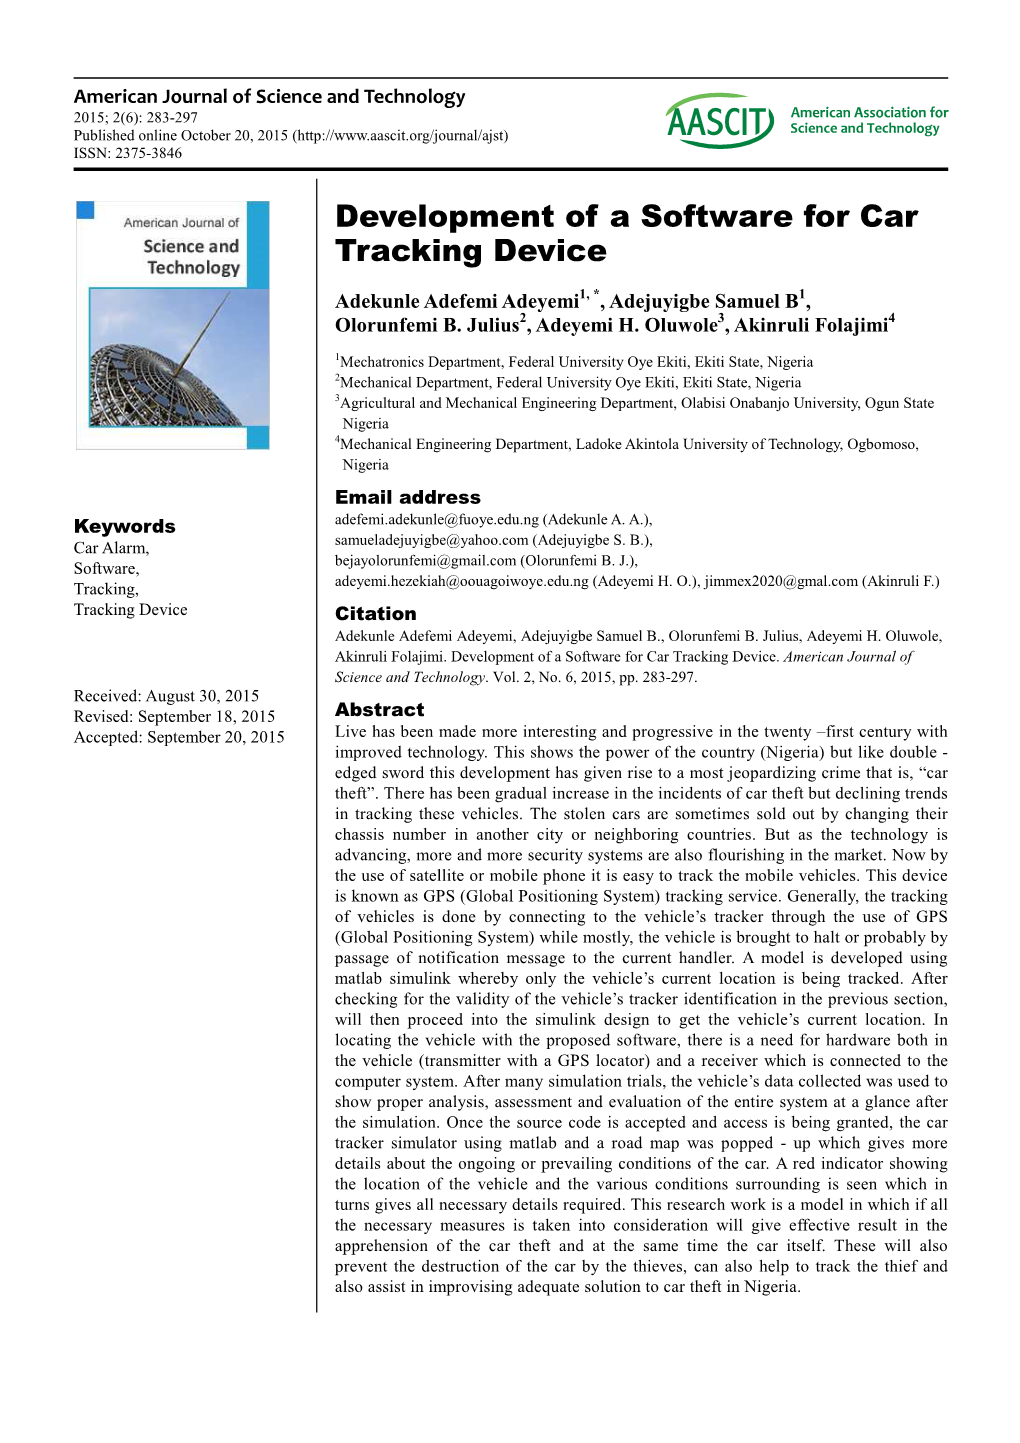 Development of a Software for Car Tracking Device